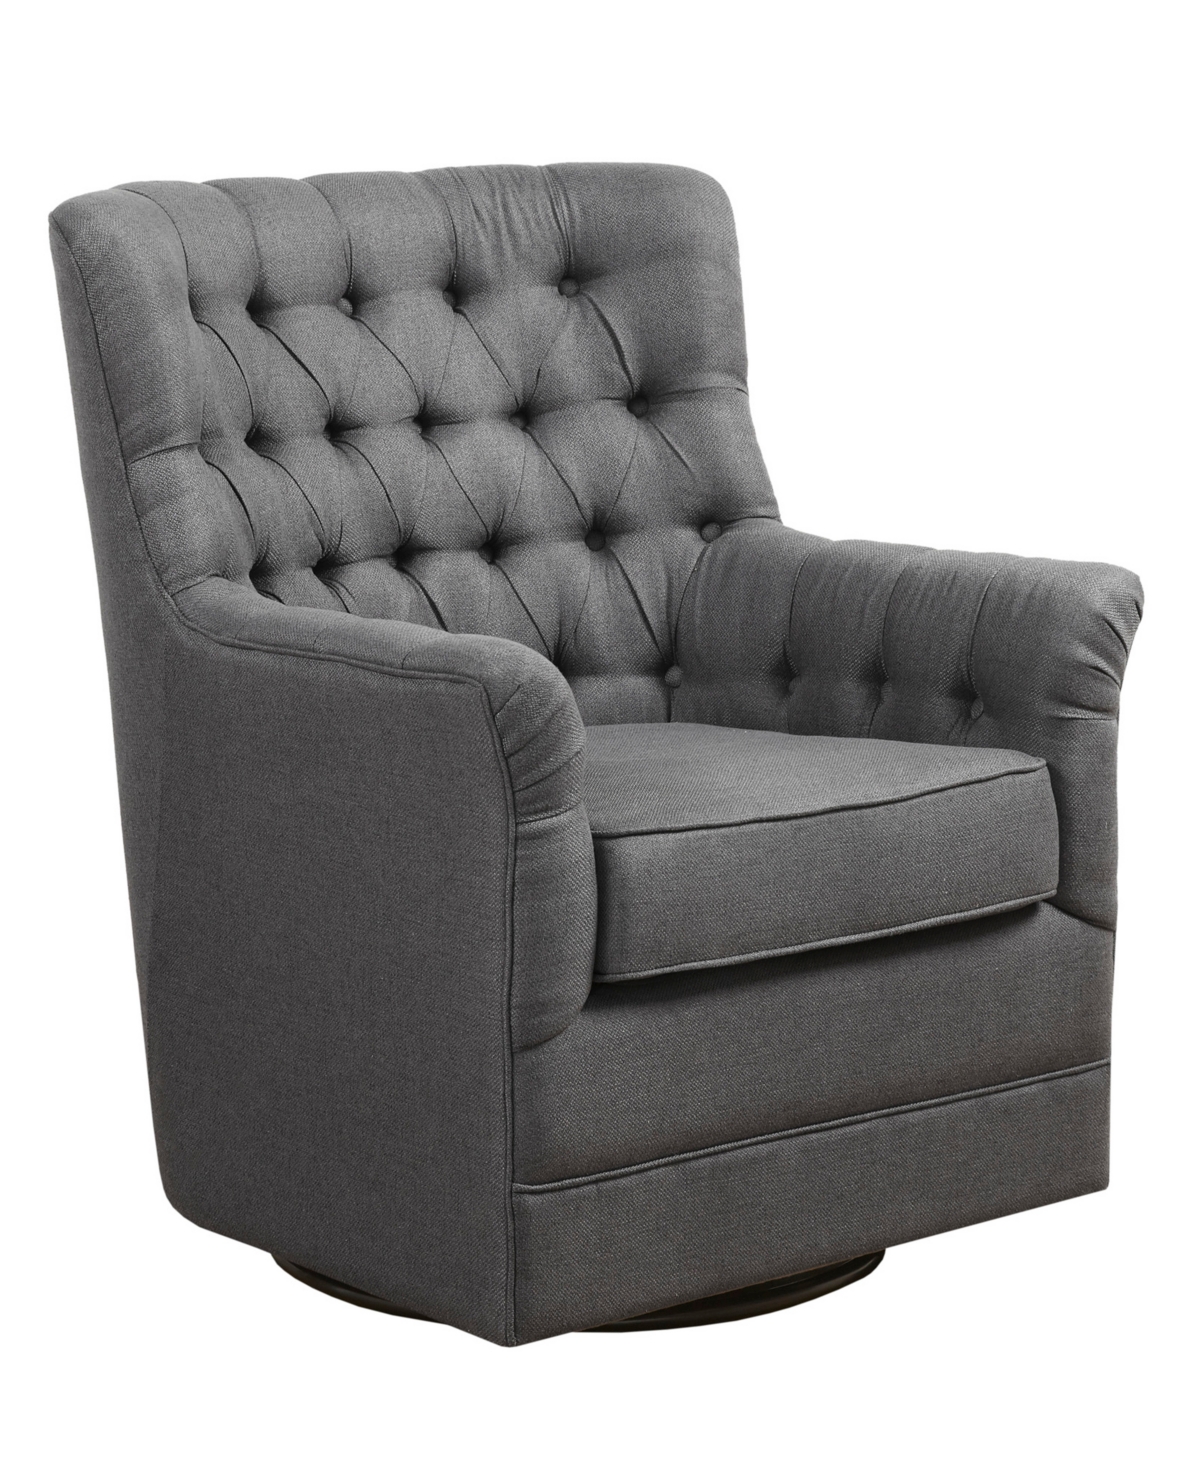 Madison Park Mathis 29.5" Fabric Wide Swivel Glider Chair In Gray